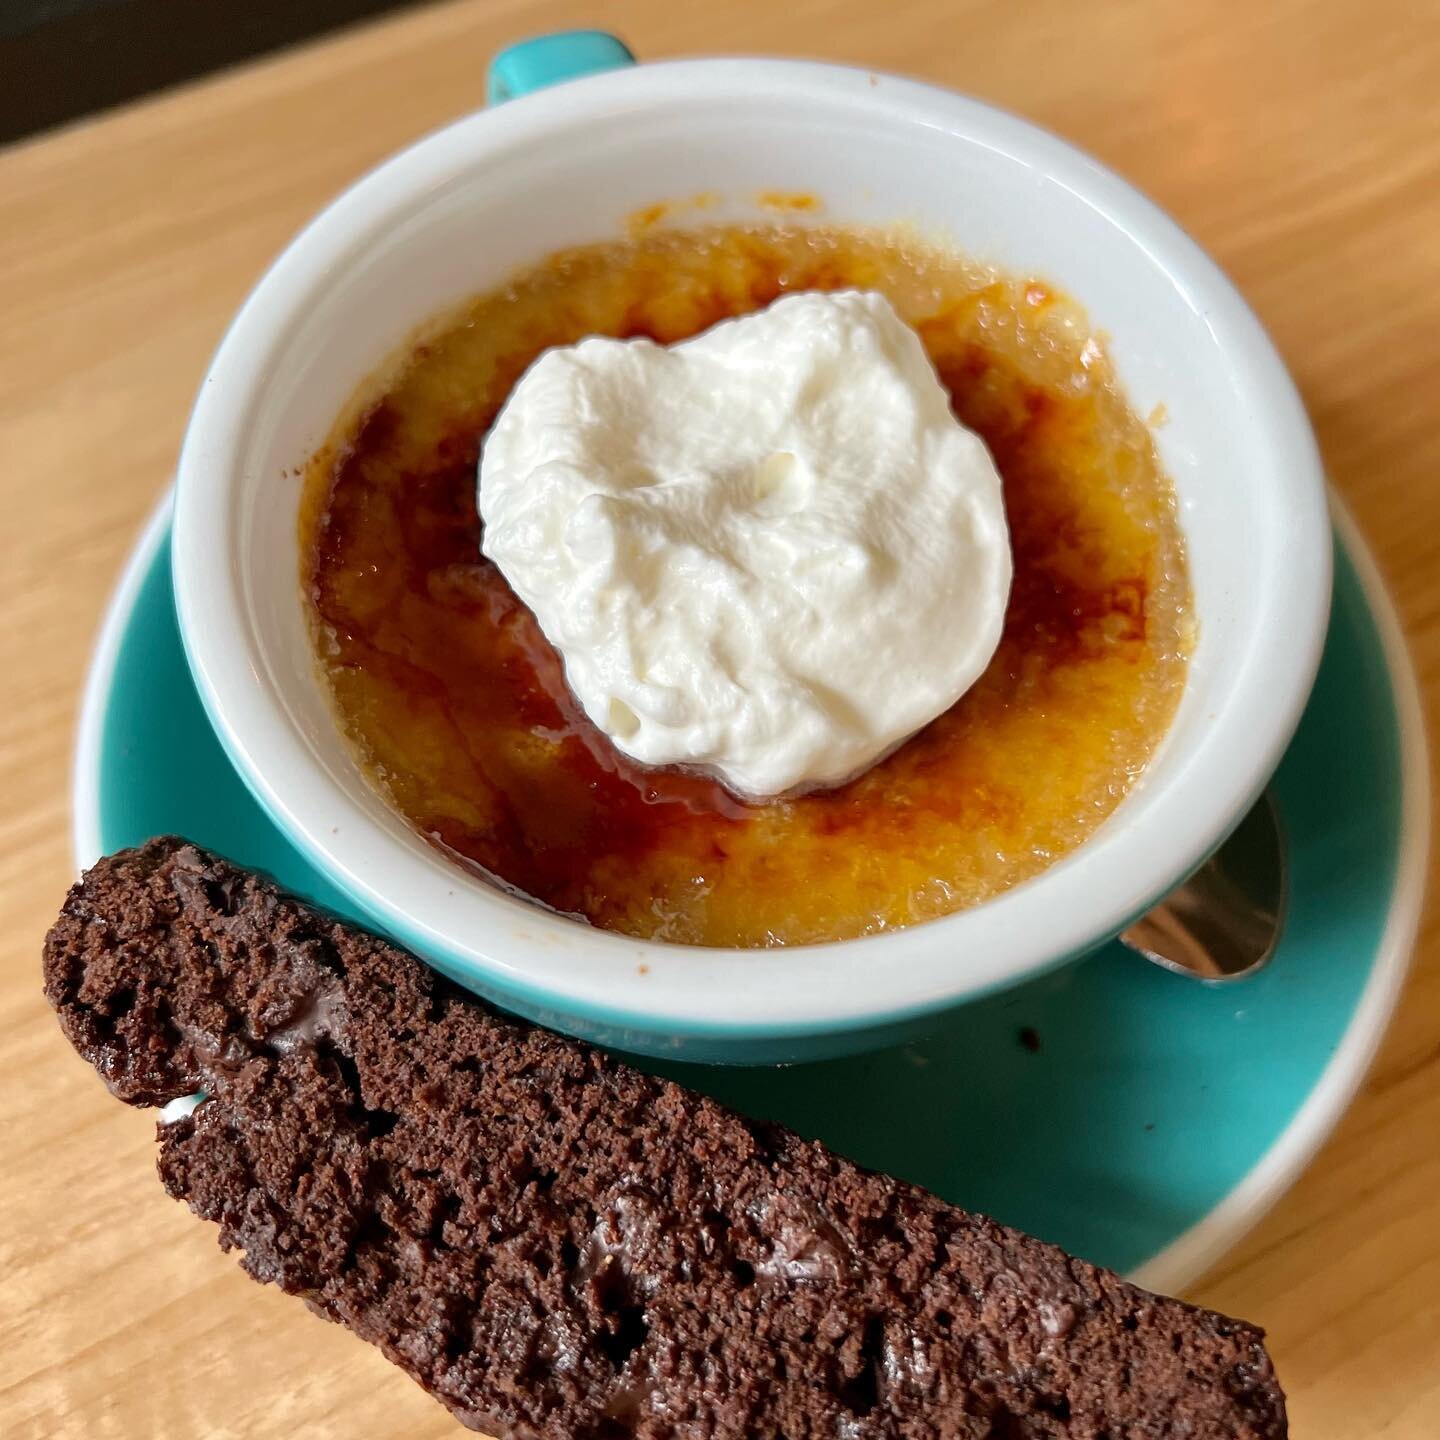 Hello world, meet our Coffee Cr&egrave;me Br&ucirc;l&eacute;e! ☕️ Made with our Durham neighbors Counter Culture Coffee&rsquo;s freshly roasted beans 🤤 And comes with a soft dollop of house-made whipped cream and a double chocolate-toffee biscotti! 